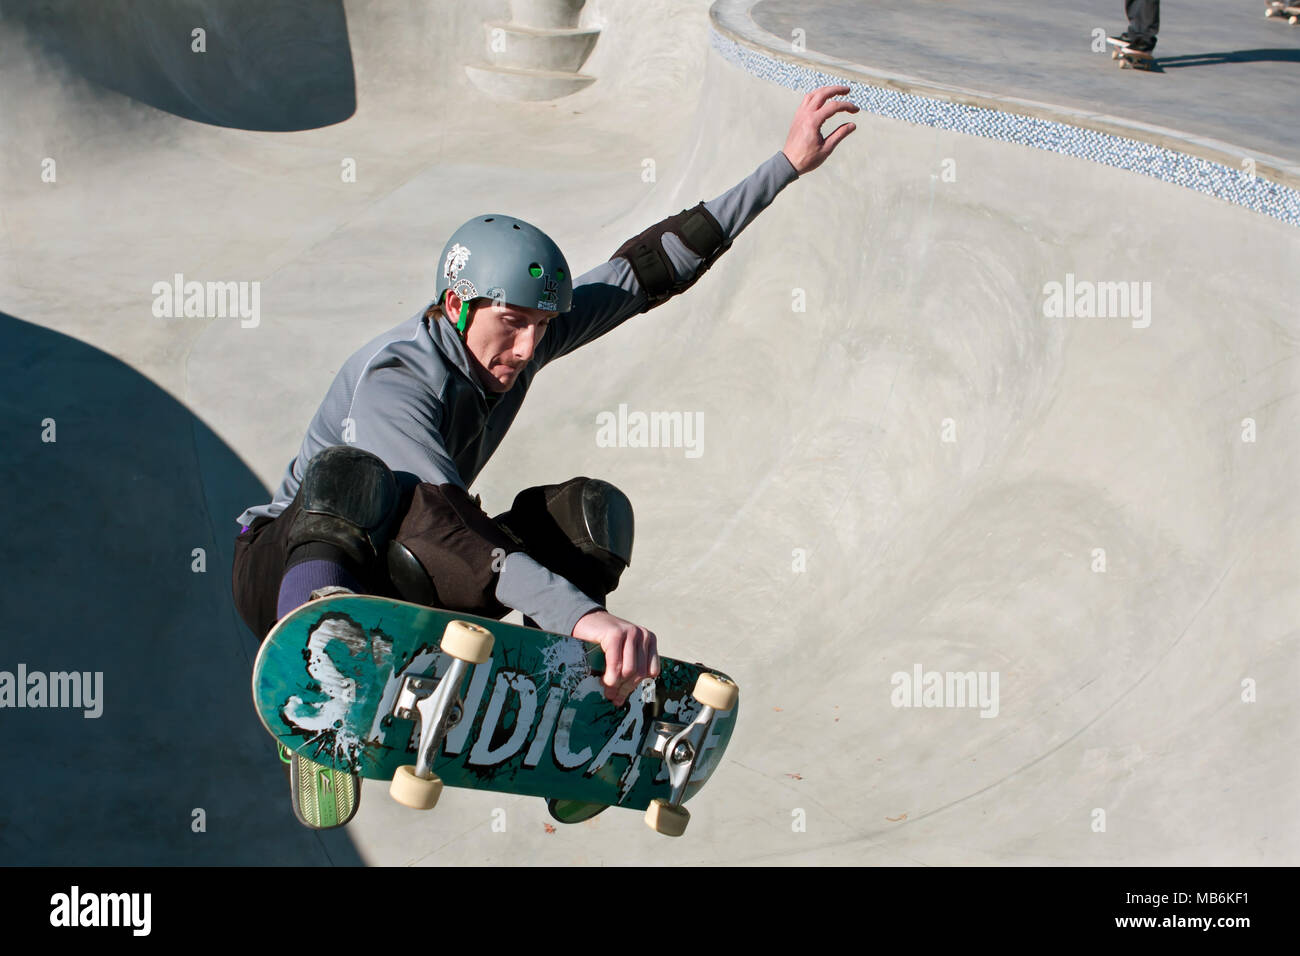 A veteran skateboarder catches air in the bowl during 'Old Man Sundays,' at the skateboard park in Kennesaw, GA on November 24, 2013. Stock Photo